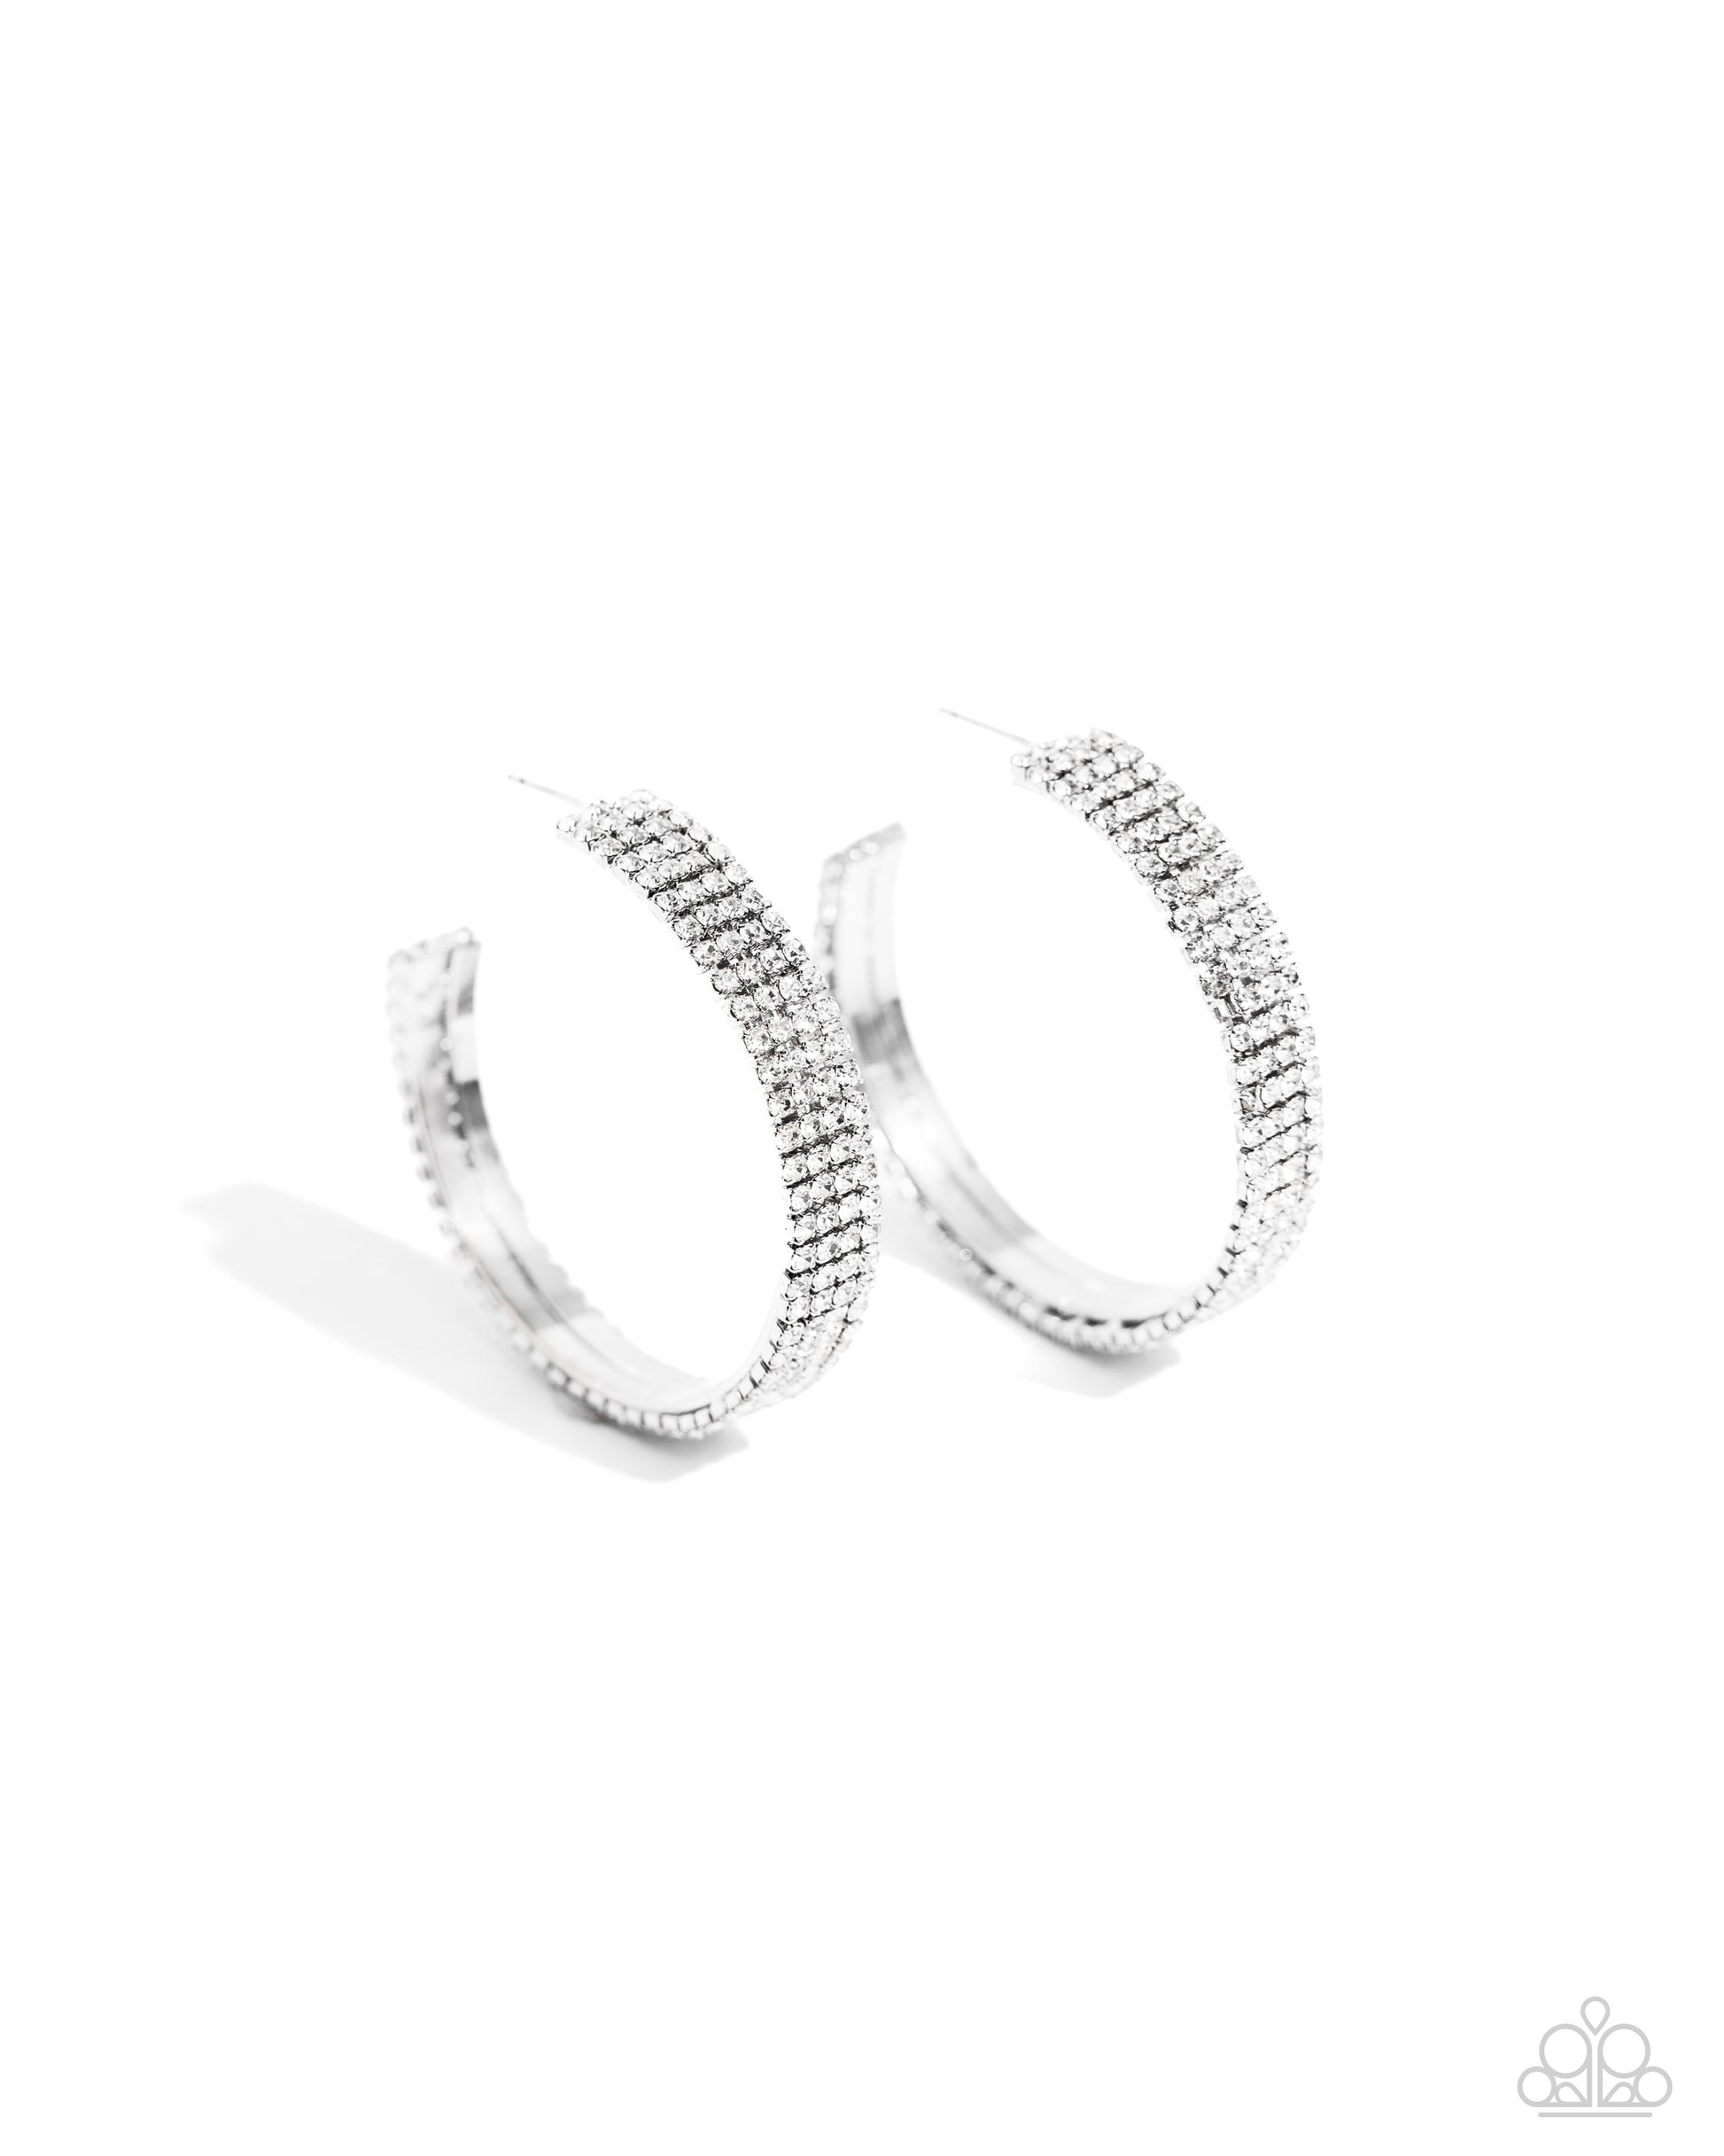 Paparazzi Accessories - Stacked Symmetry - White Hoop Earrings set in silver square fittings, row after row of white rhinestones are embellished around a silver hoop for a dazzling design. Earring attaches to a standard post fitting. Hoop measures approximately 2" in diameter. Sold as one pair of hoop earrings.